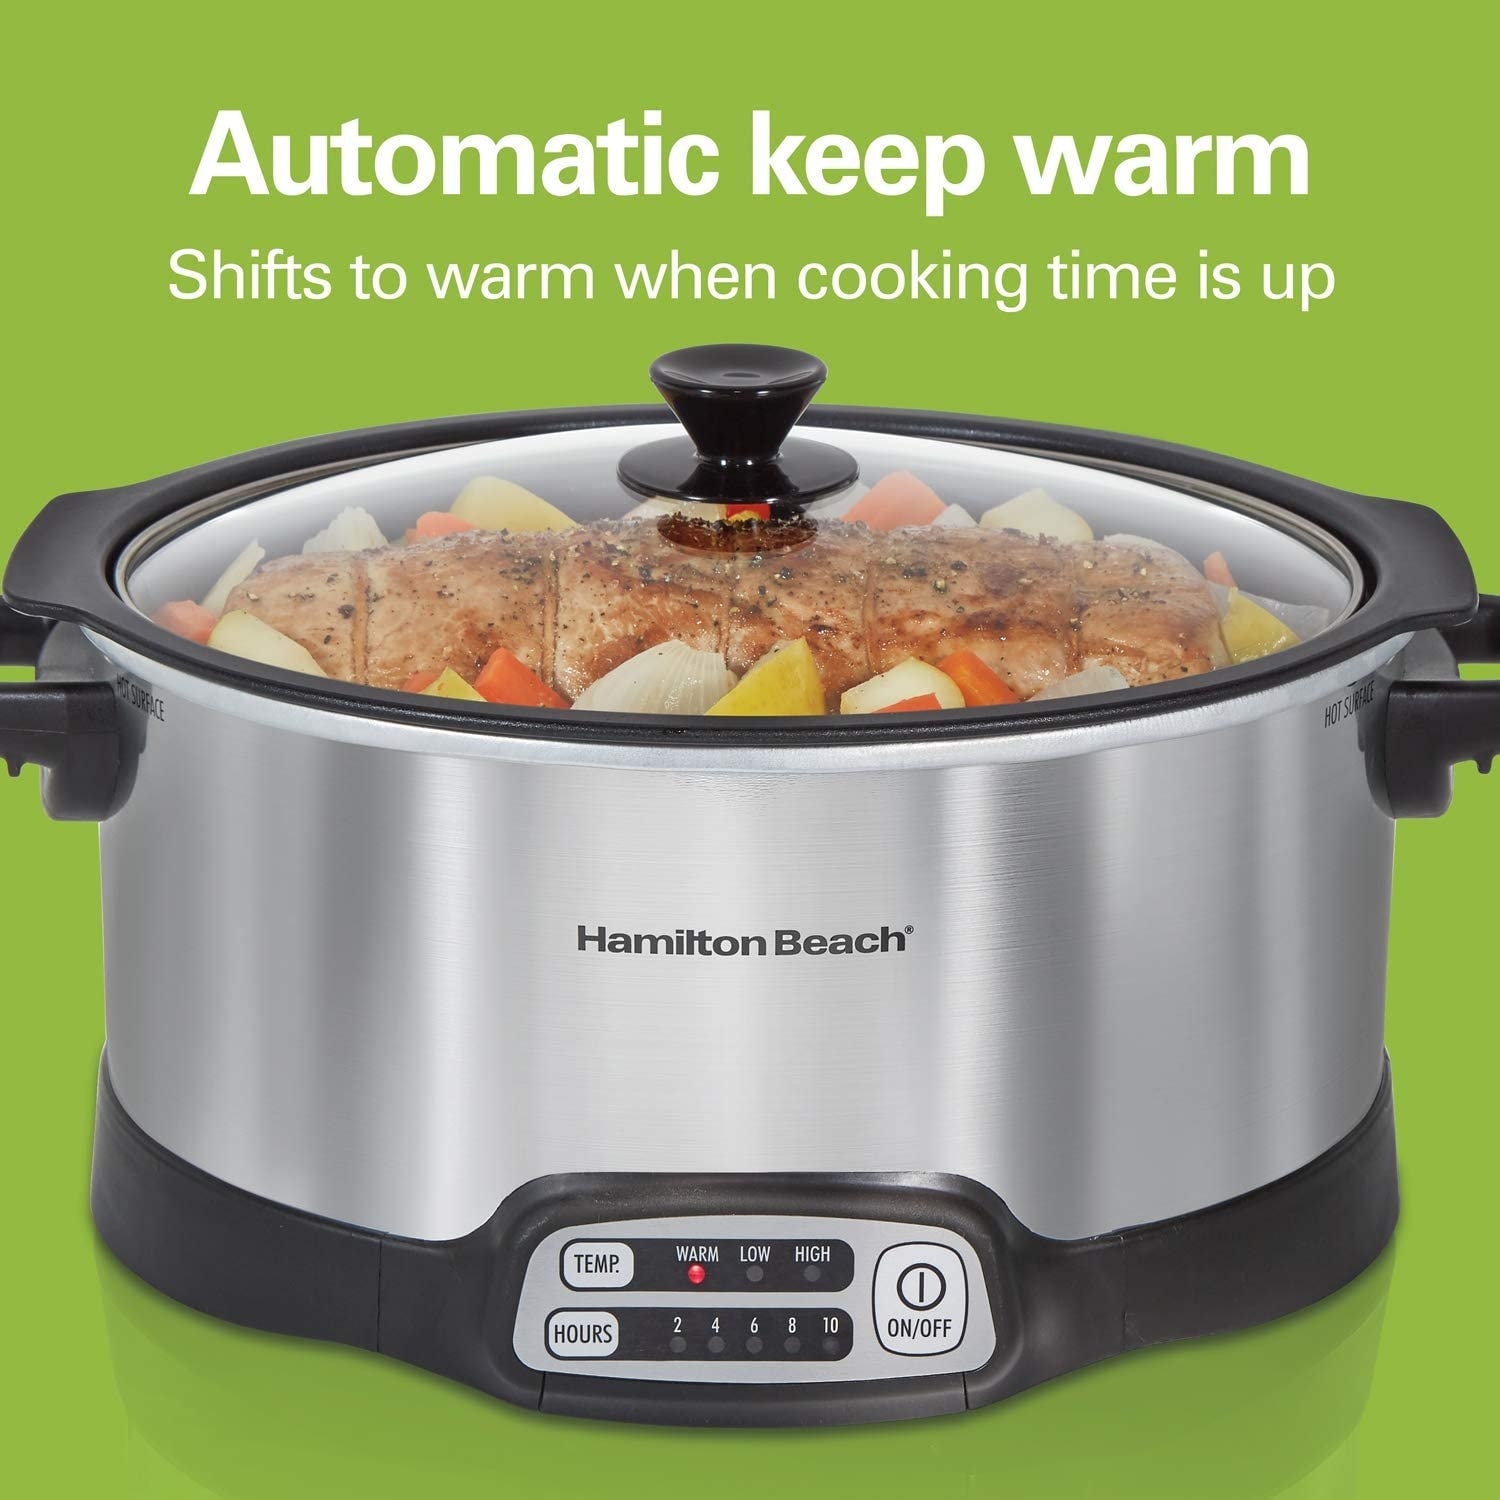 https://ak1.ostkcdn.com/images/products/is/images/direct/4116eb3c5efc139d5dbcc391d283acf0b99b4fba/Slow-Cooker-with-6-Quart-Stovetop-Safe-Sear-%3B-Cook-Crock%2C-Travel-Lid-Lock-for-Portable-Transport.jpg